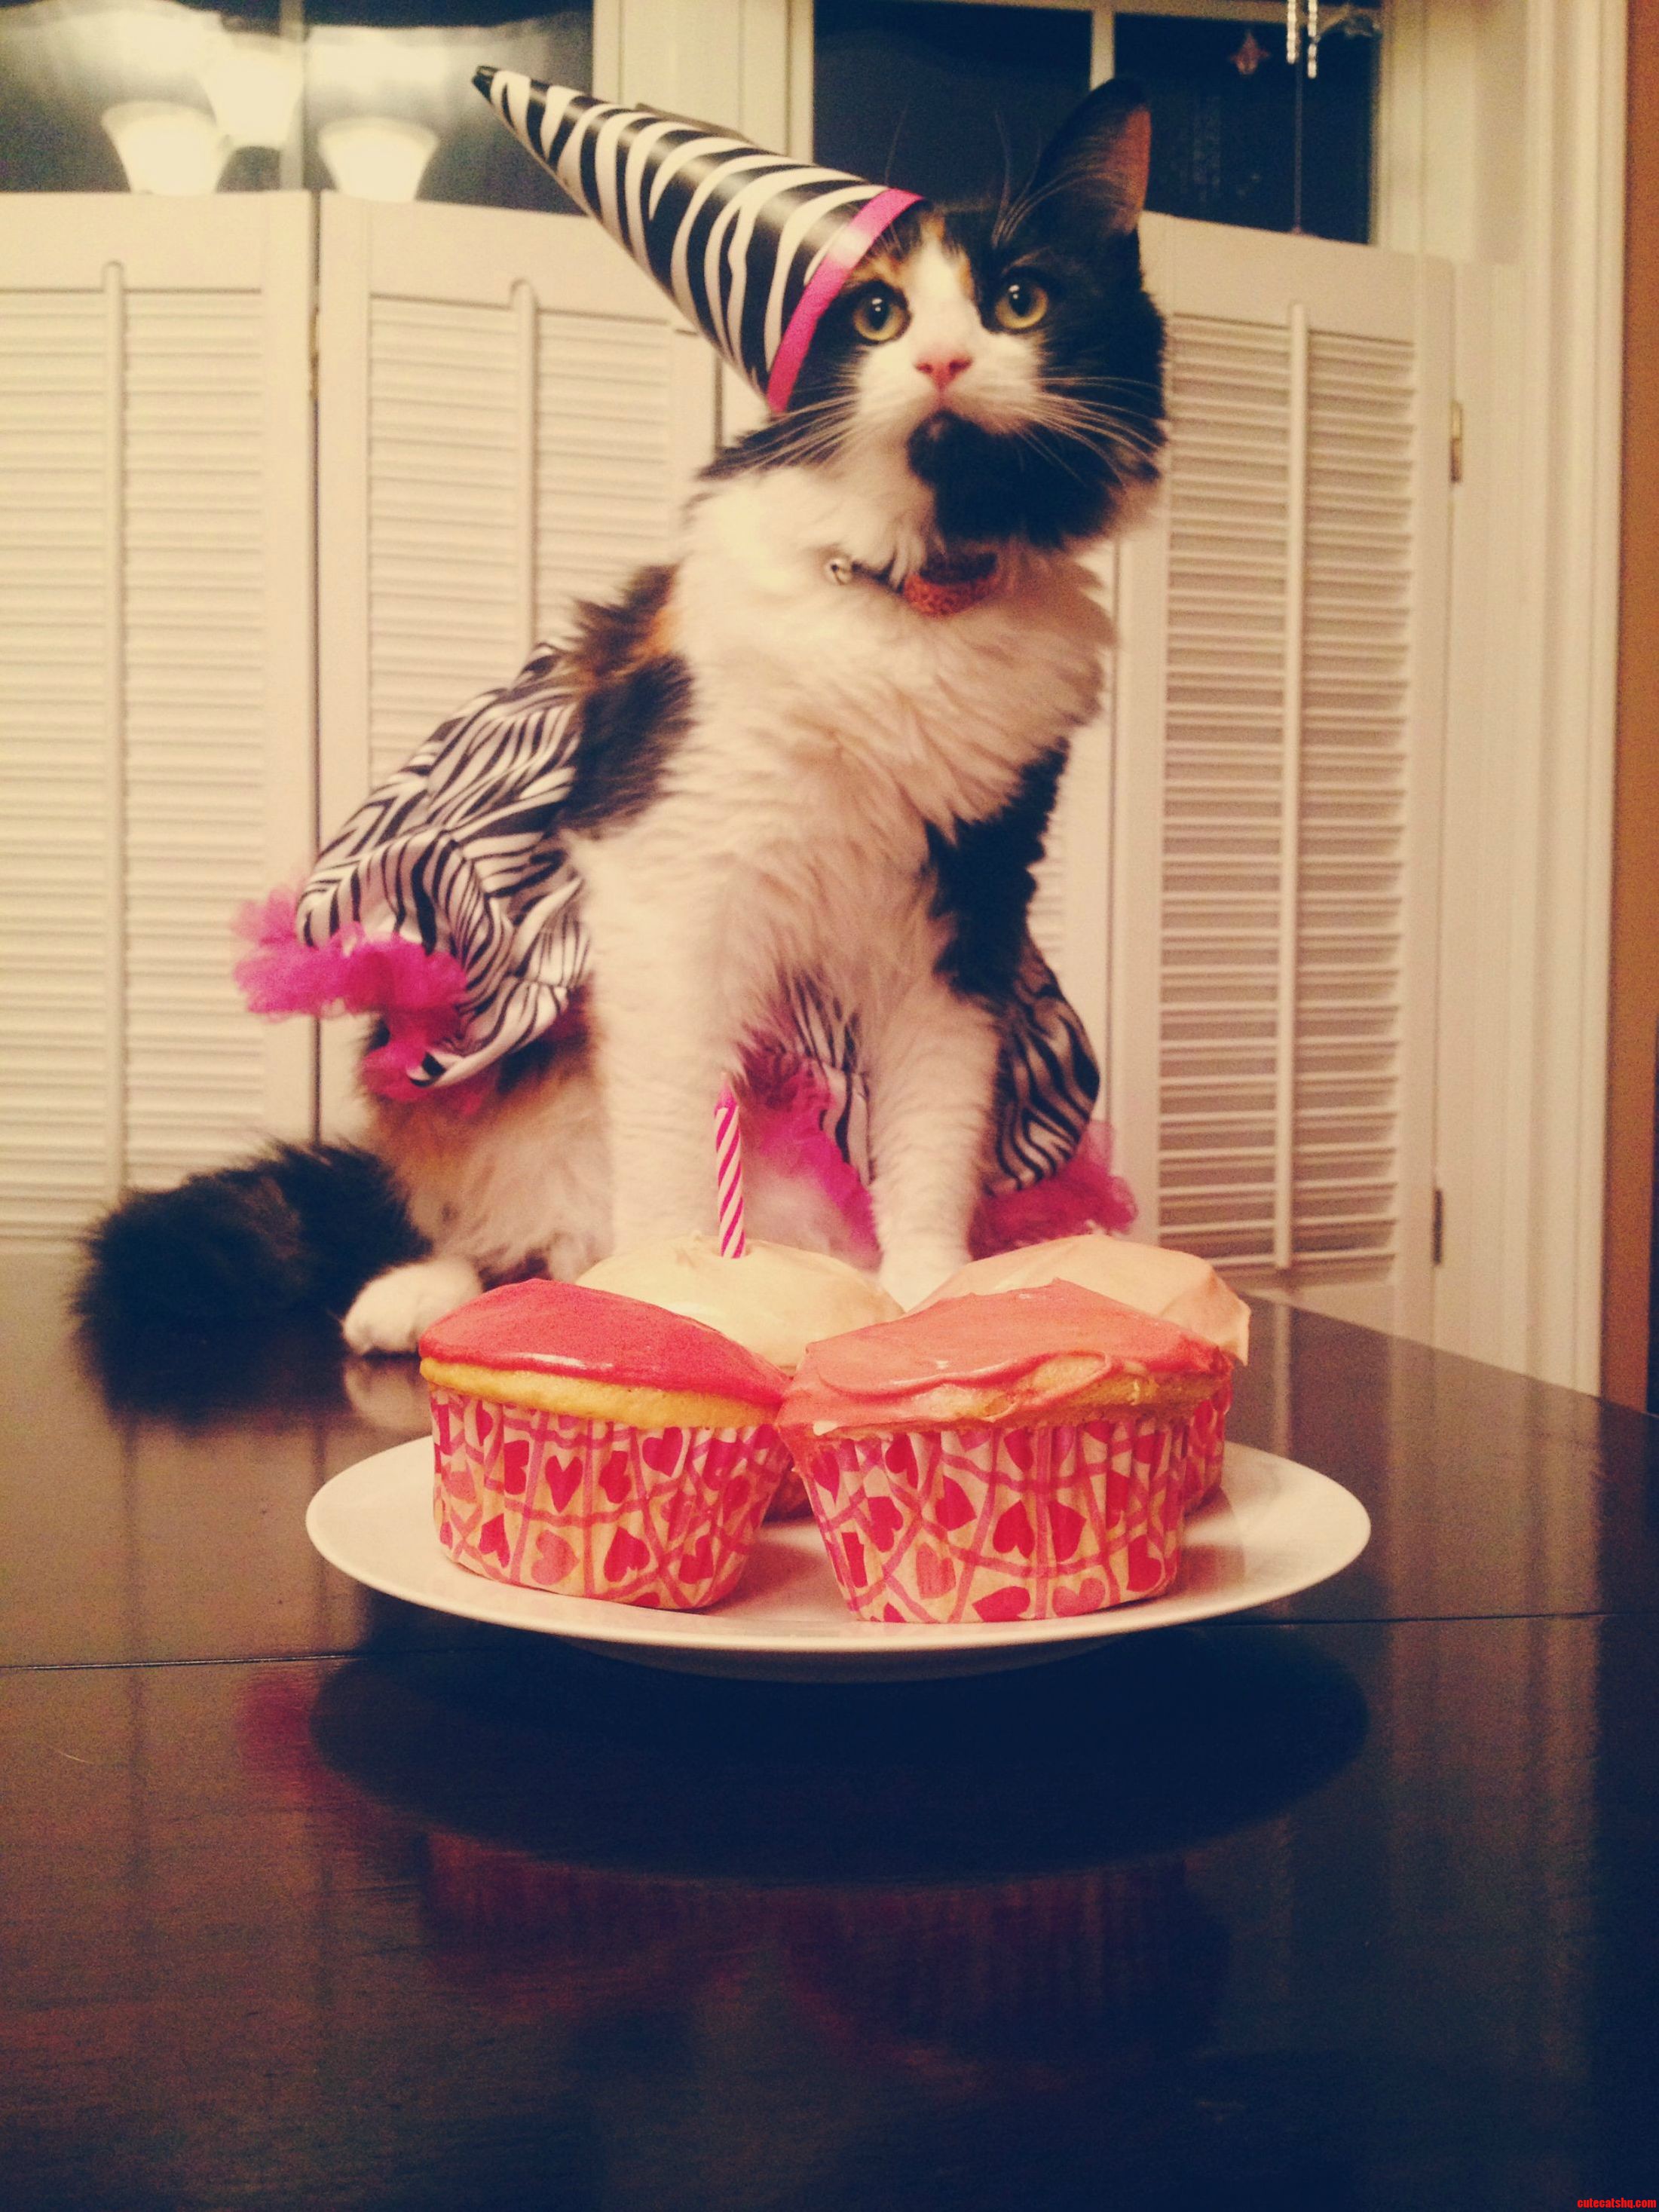 My Friend Just Sent Me This Pic Of Her Cat. Apparently Today Is Mittens Birthday